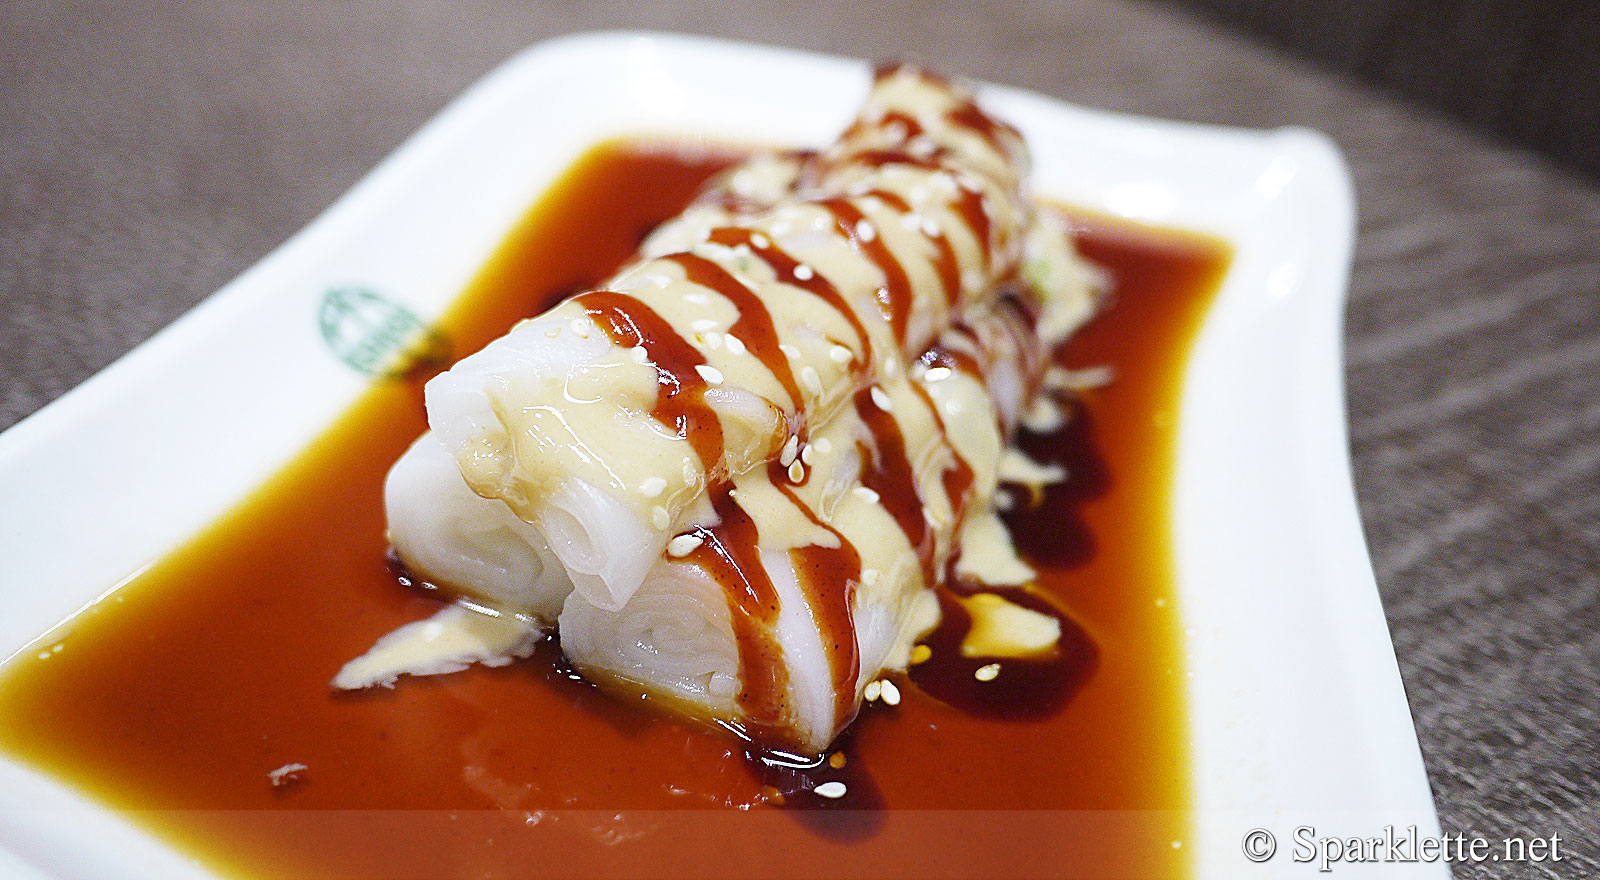 Vermicelli roll with sweet and sesame sauce